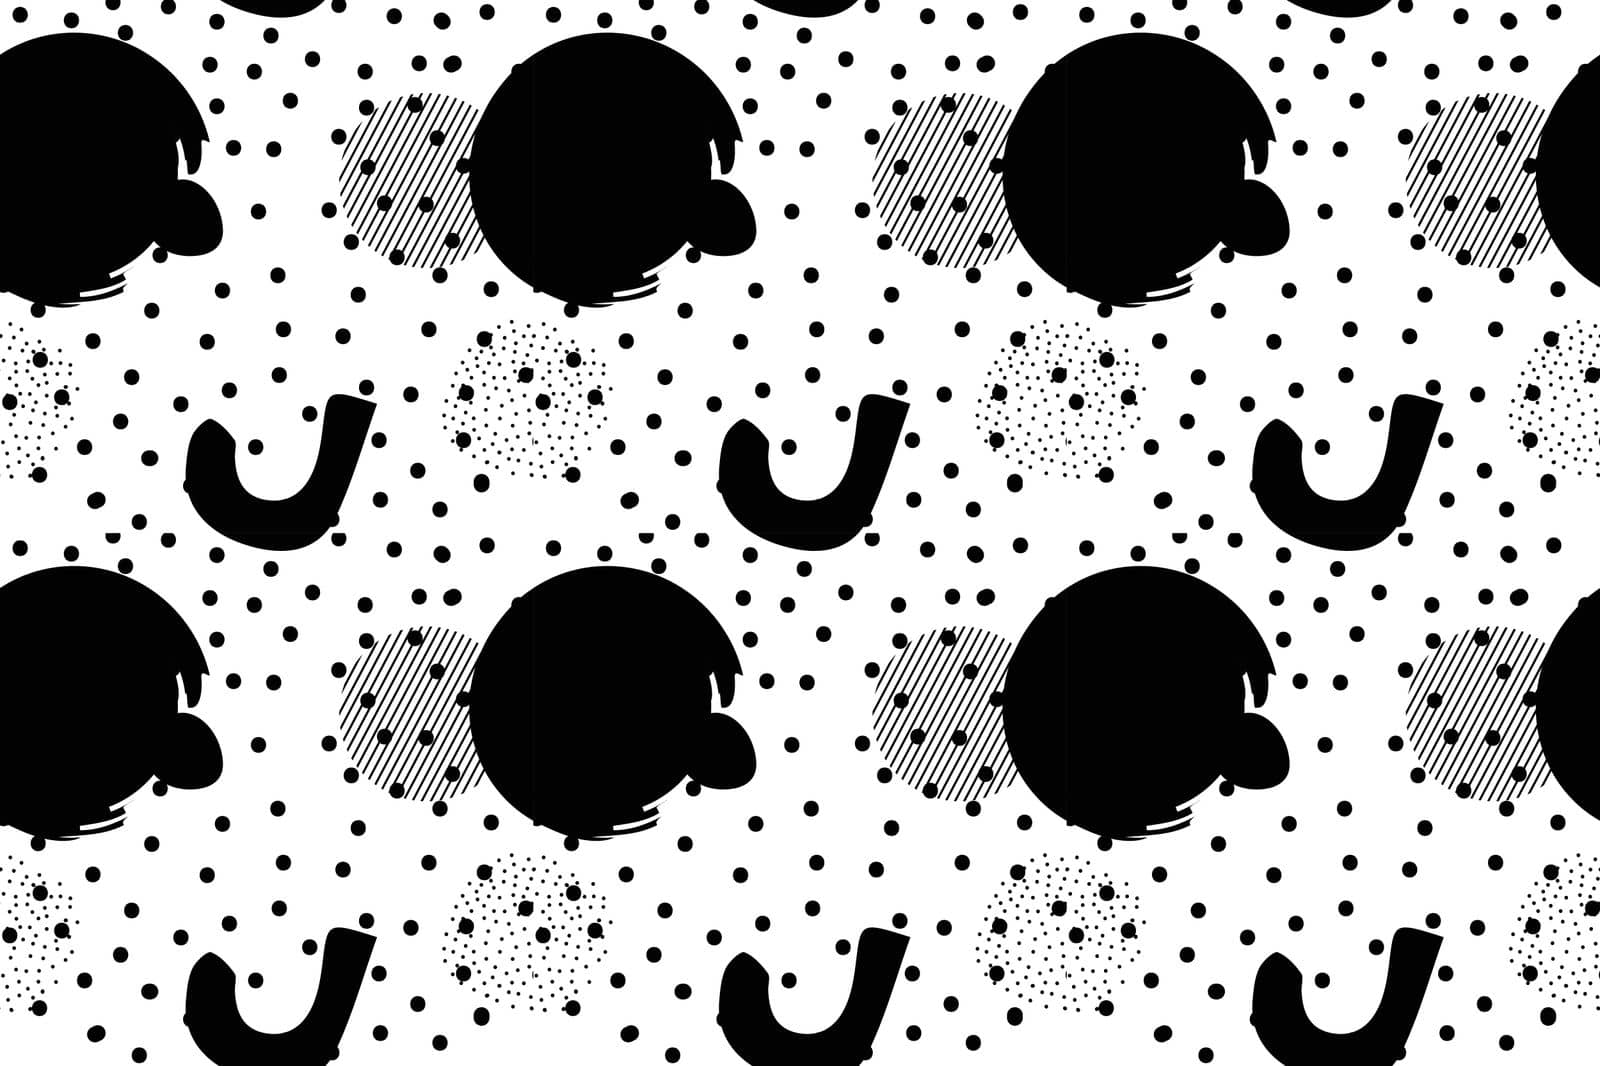 Memphis Pattern. Summer Fun Background. black white Colors. Memphis Style Patterns. Abstract hand drawn Fun Background. Hipster Style 80s-90s. Fun pattern. Vector illustration